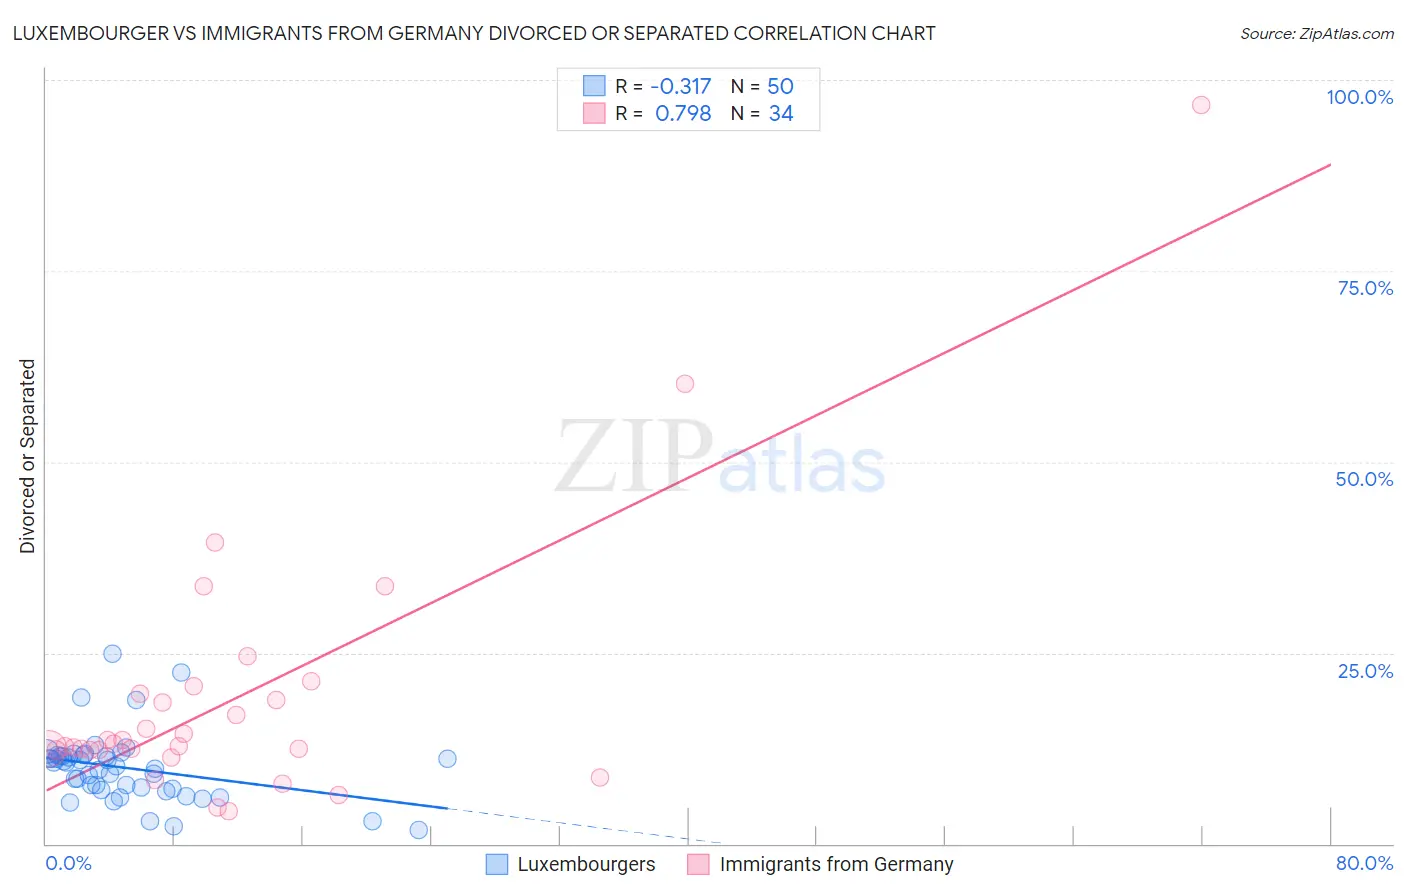 Luxembourger vs Immigrants from Germany Divorced or Separated